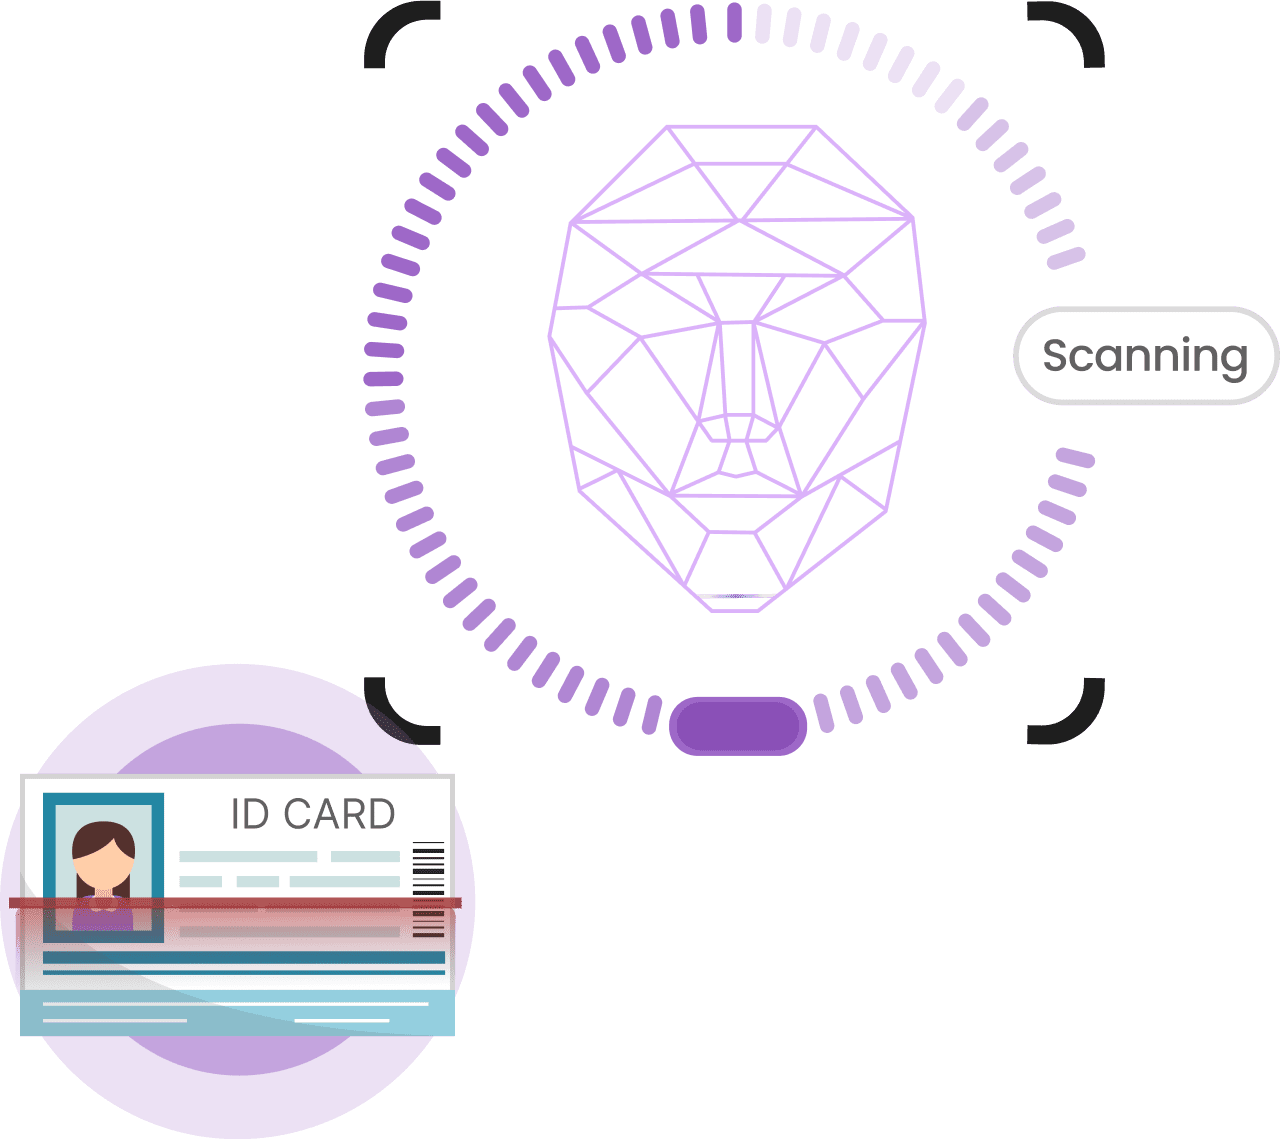 Illustration of facial recognition scanning a face and an ID card with a photo.